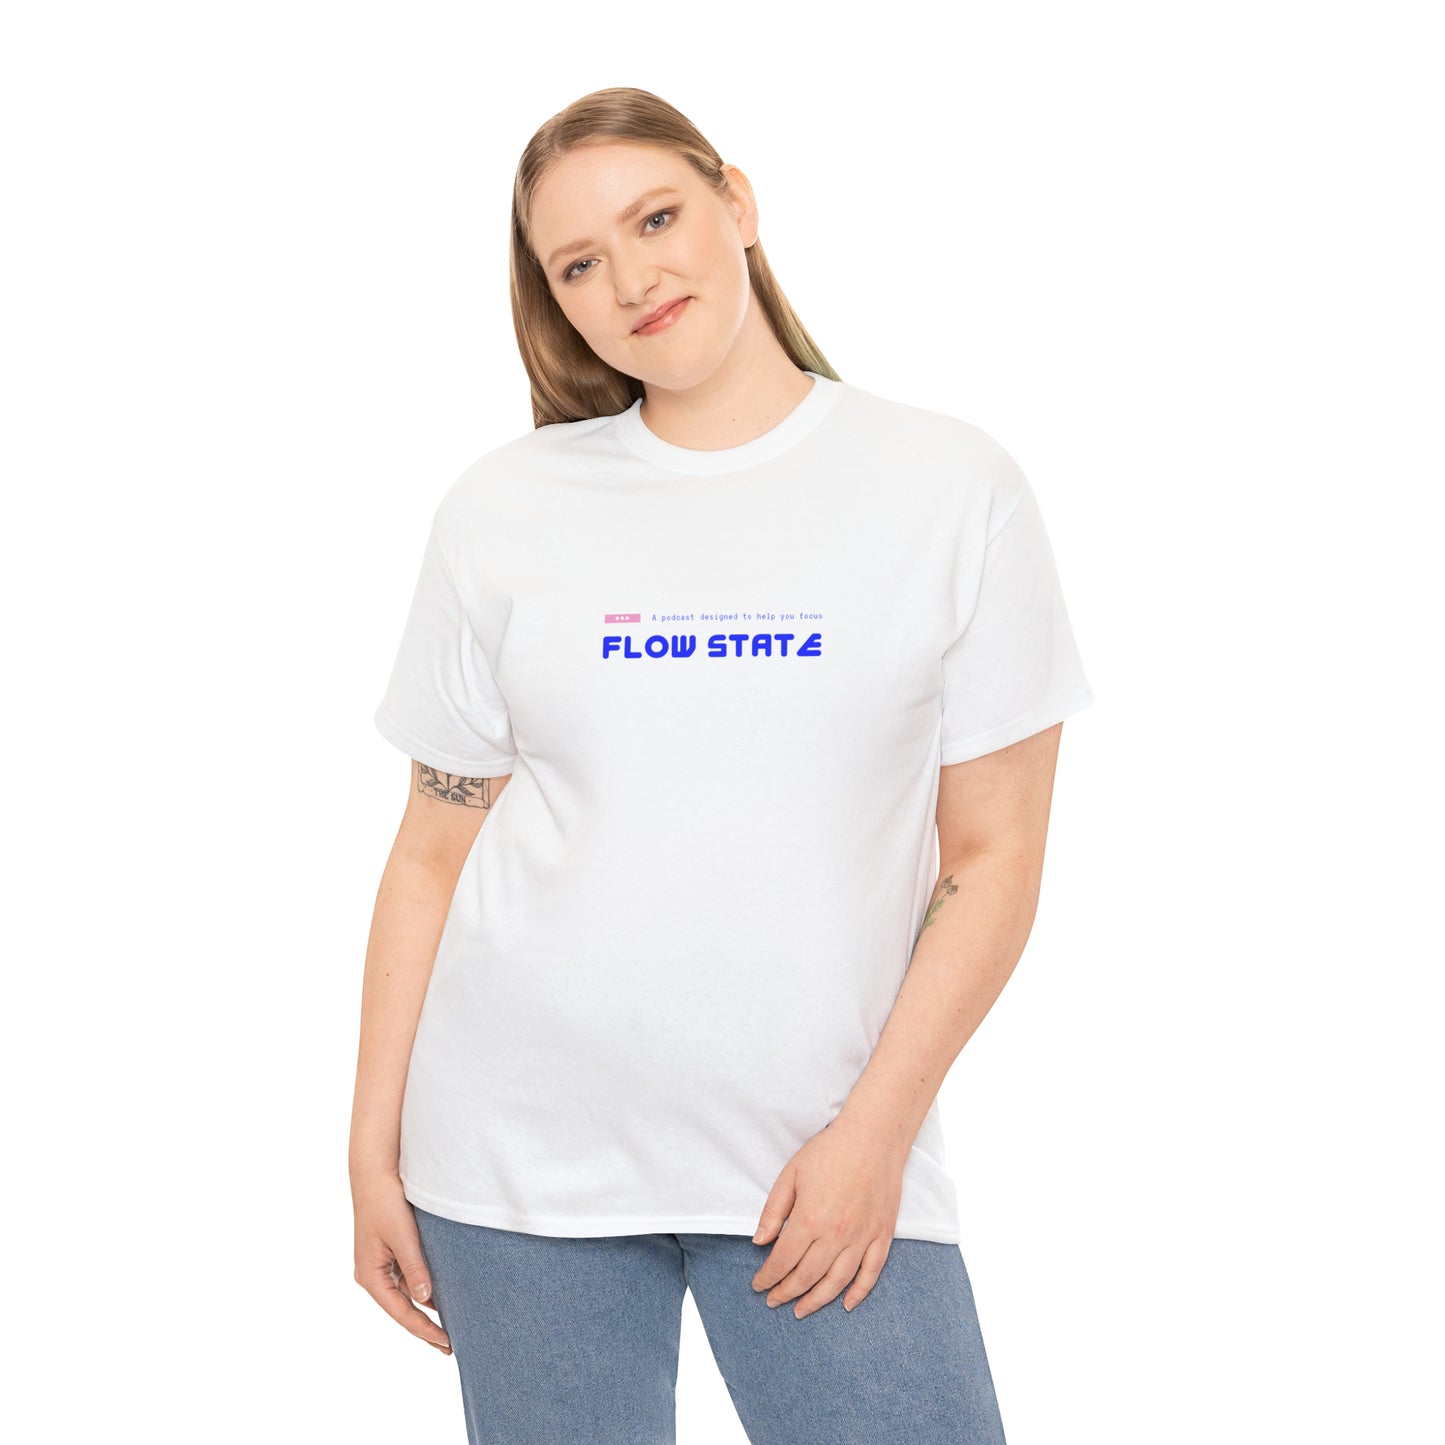 Flow State Tee